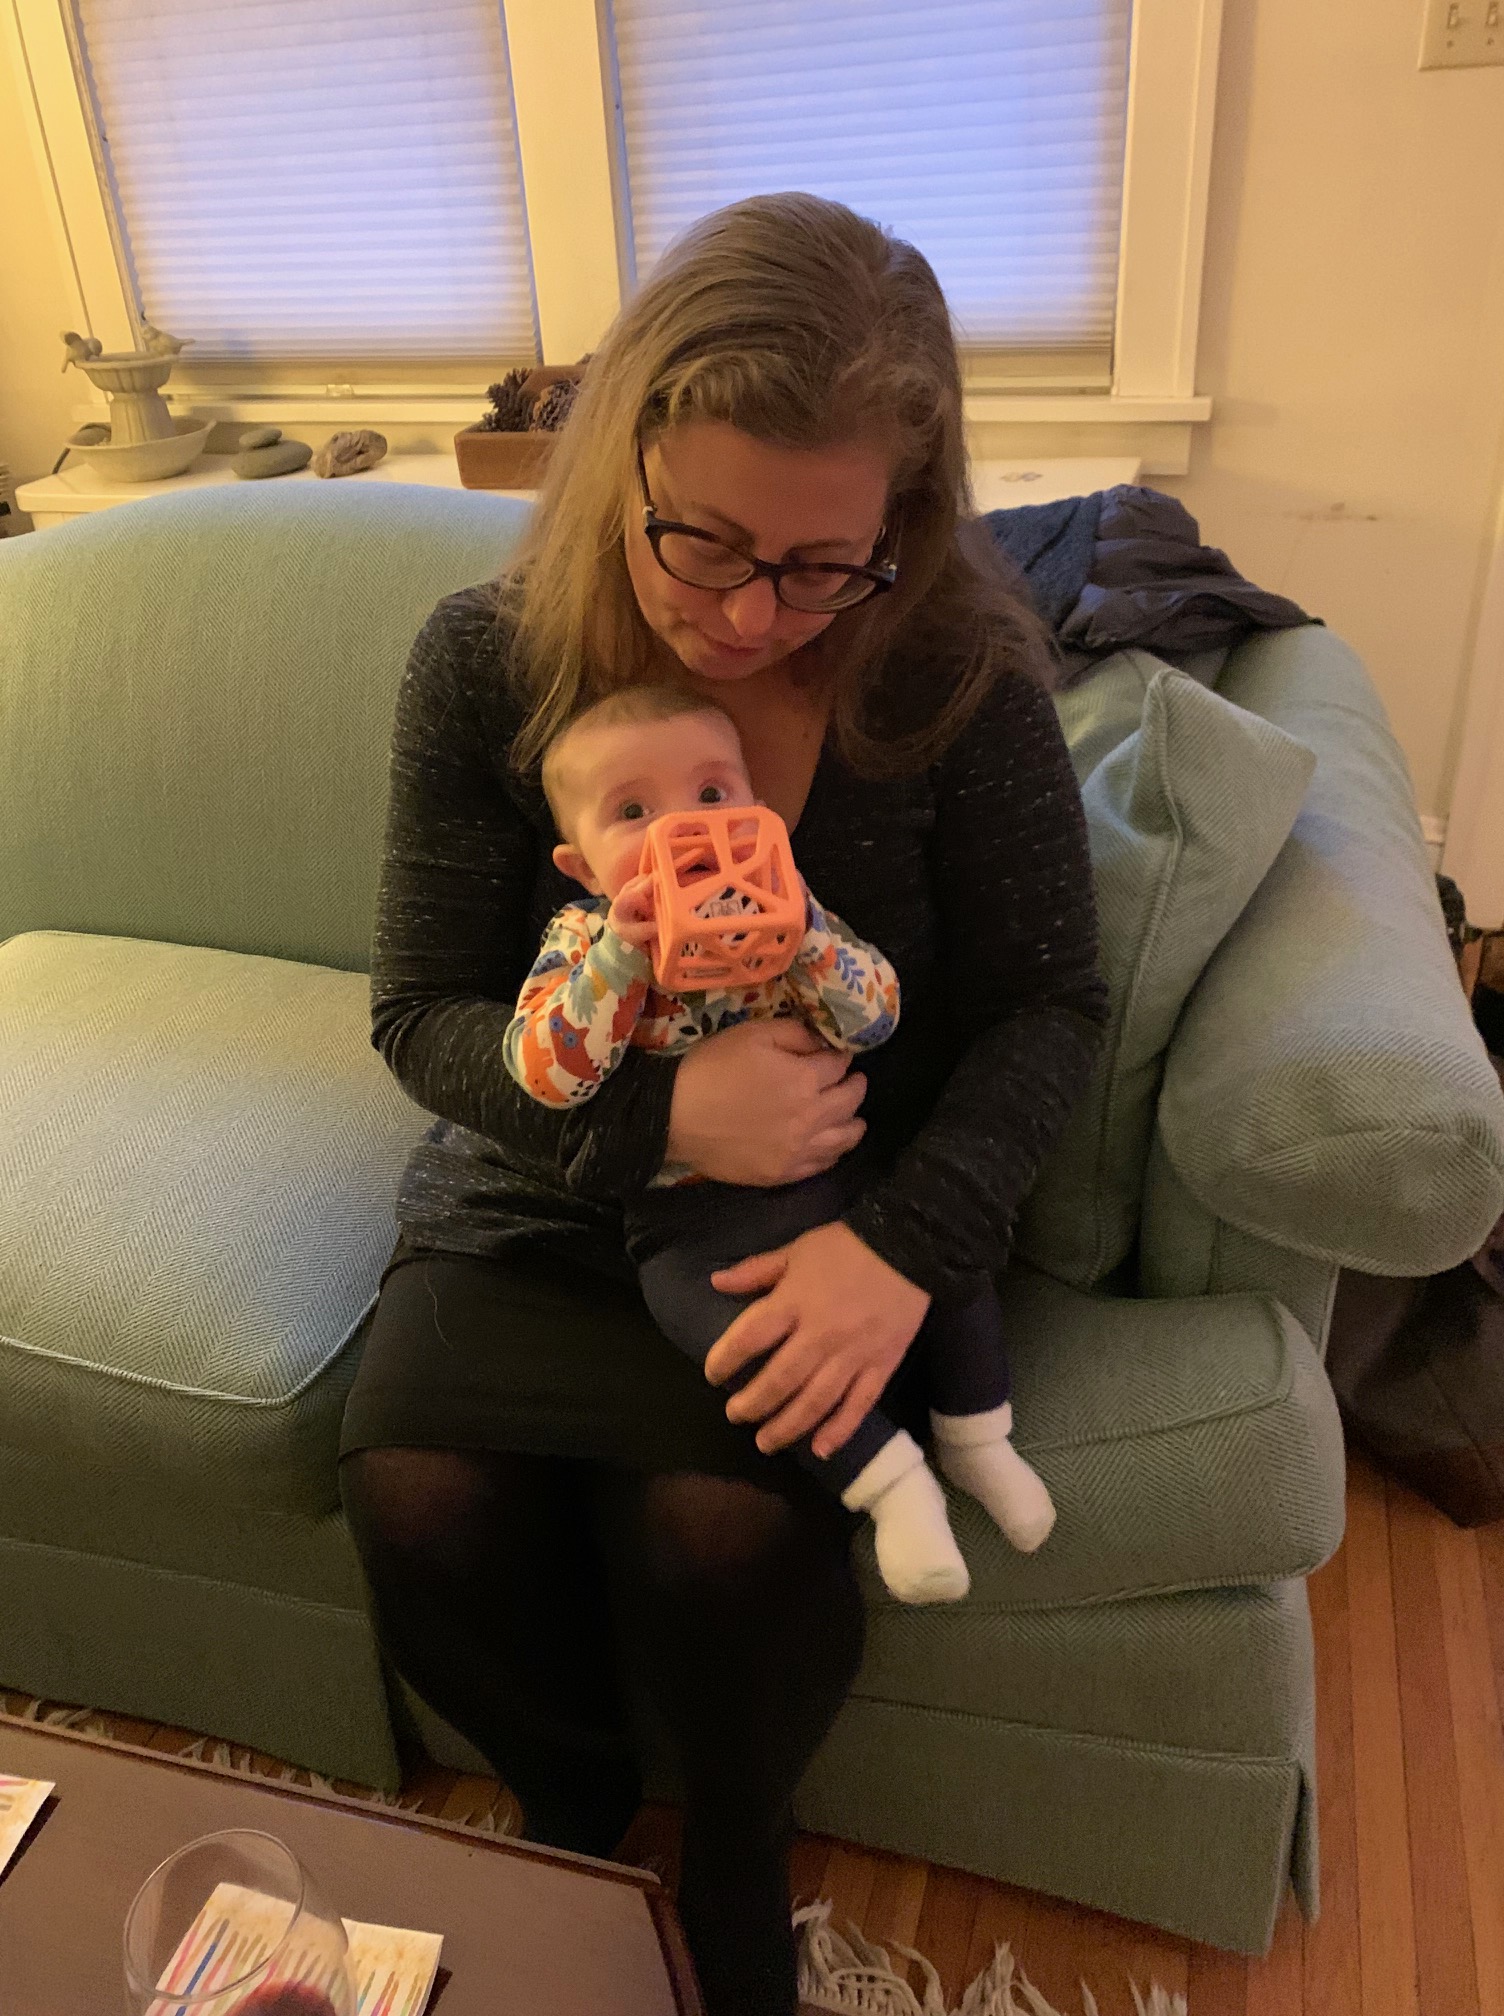 me, holding a baby